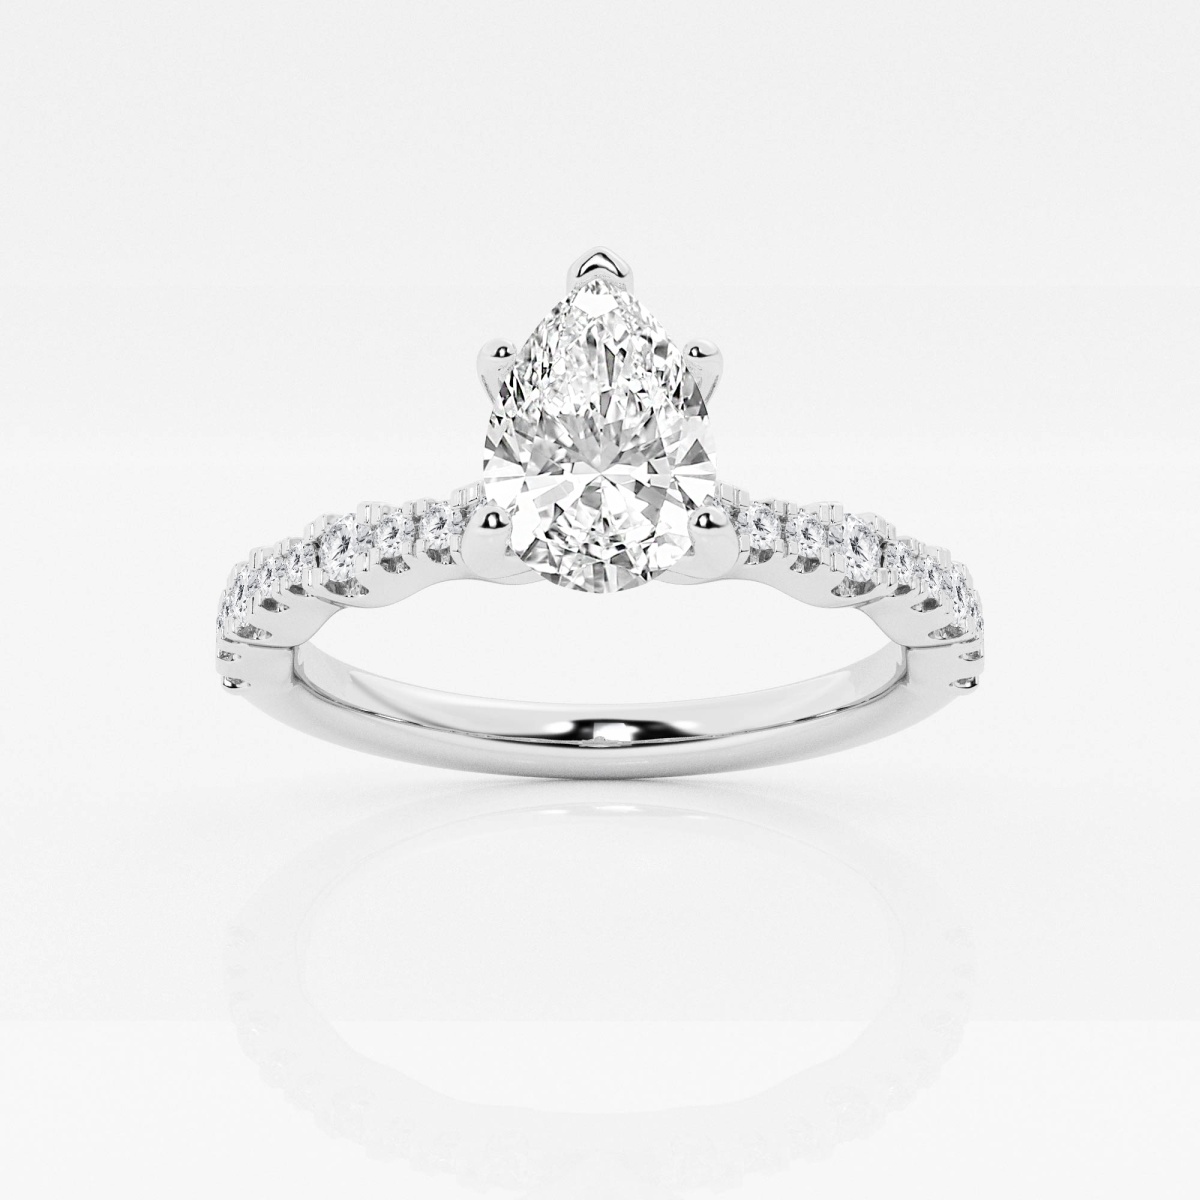 Perla. 1ctw. Pear-Shaped Diamond Halo Engagement Ring in 14K White Gold